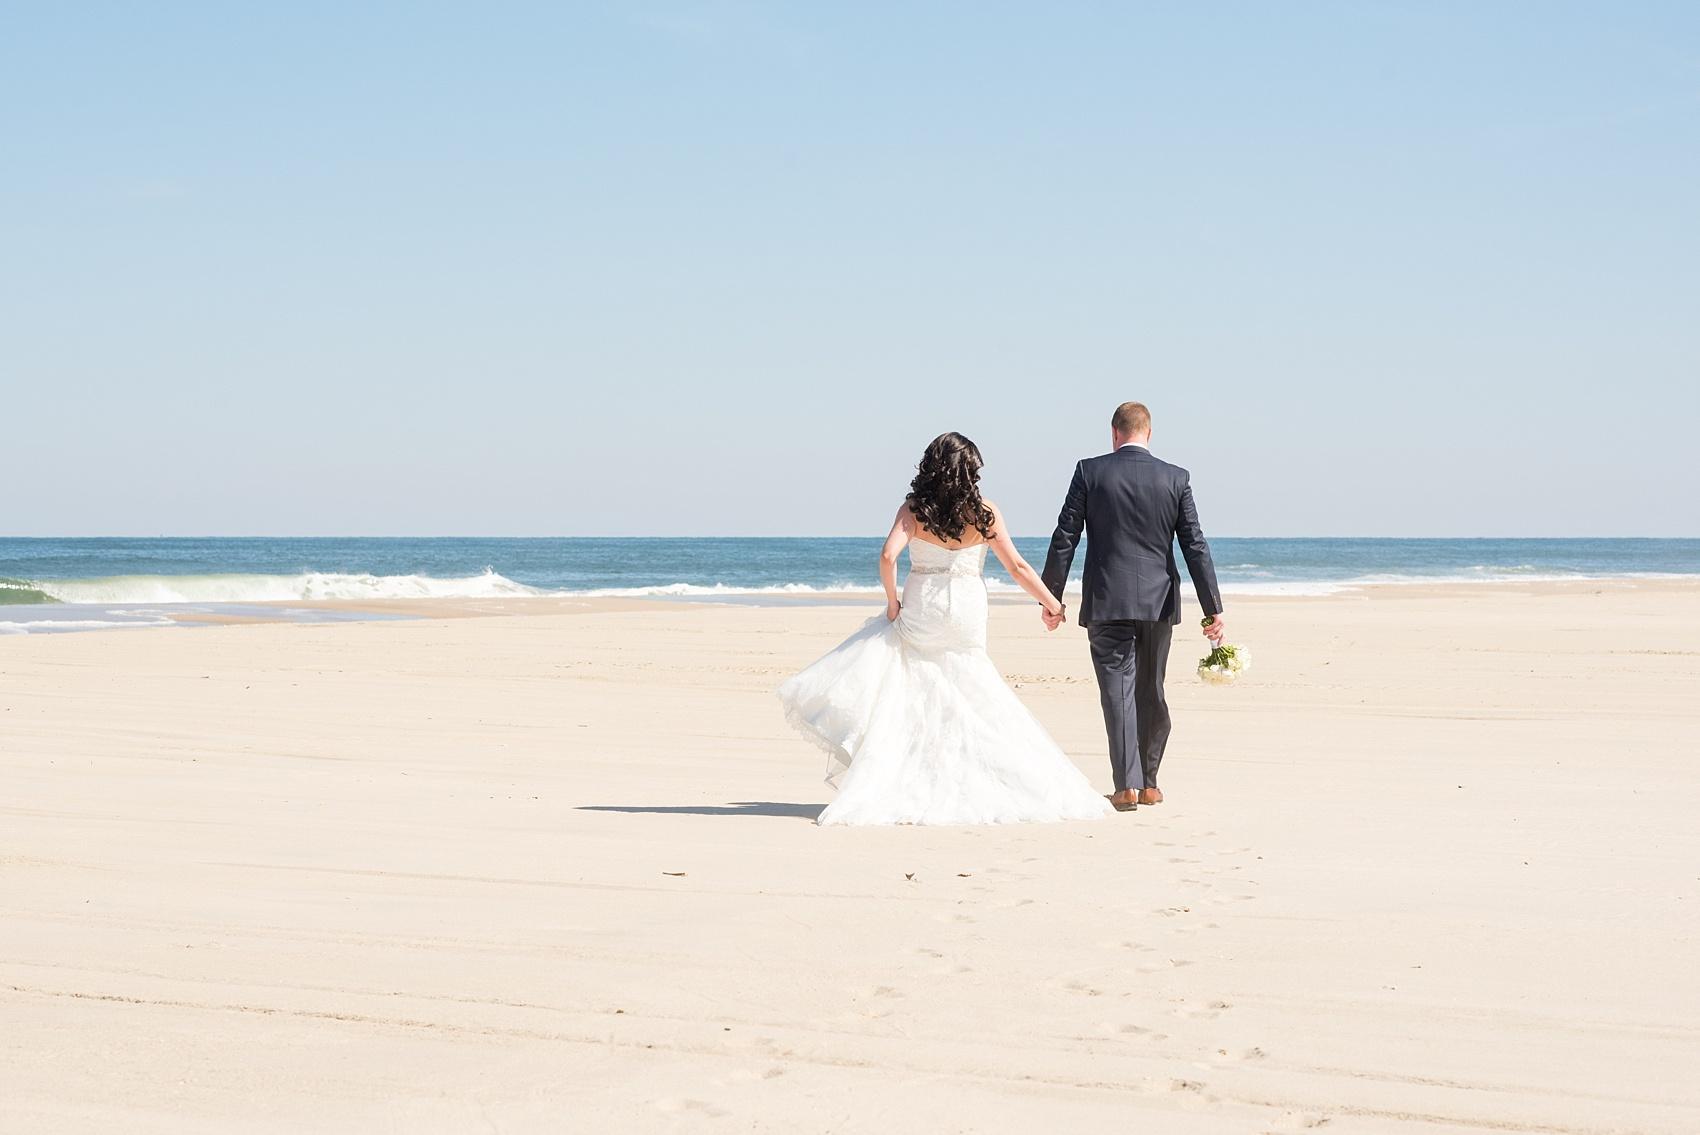 Photo by Mikkel Paige photography. Bride and groom photos on the beach for their spring wedding at Windows on the Water, New Jersey.